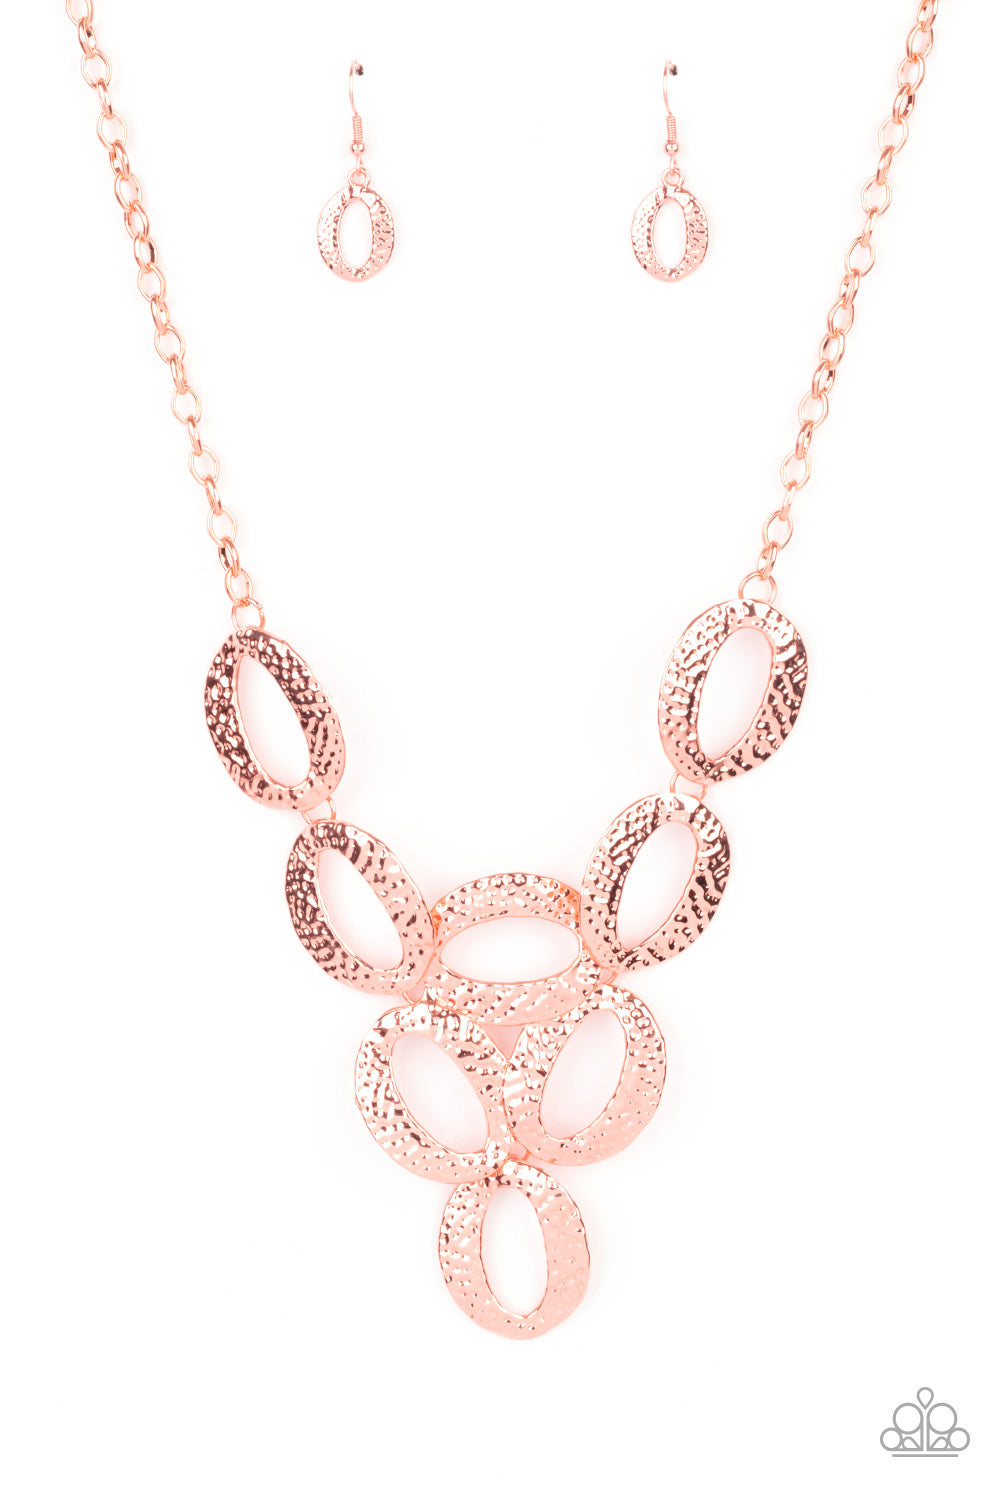 Paparazzi OVAL The Limit - Copper Necklace